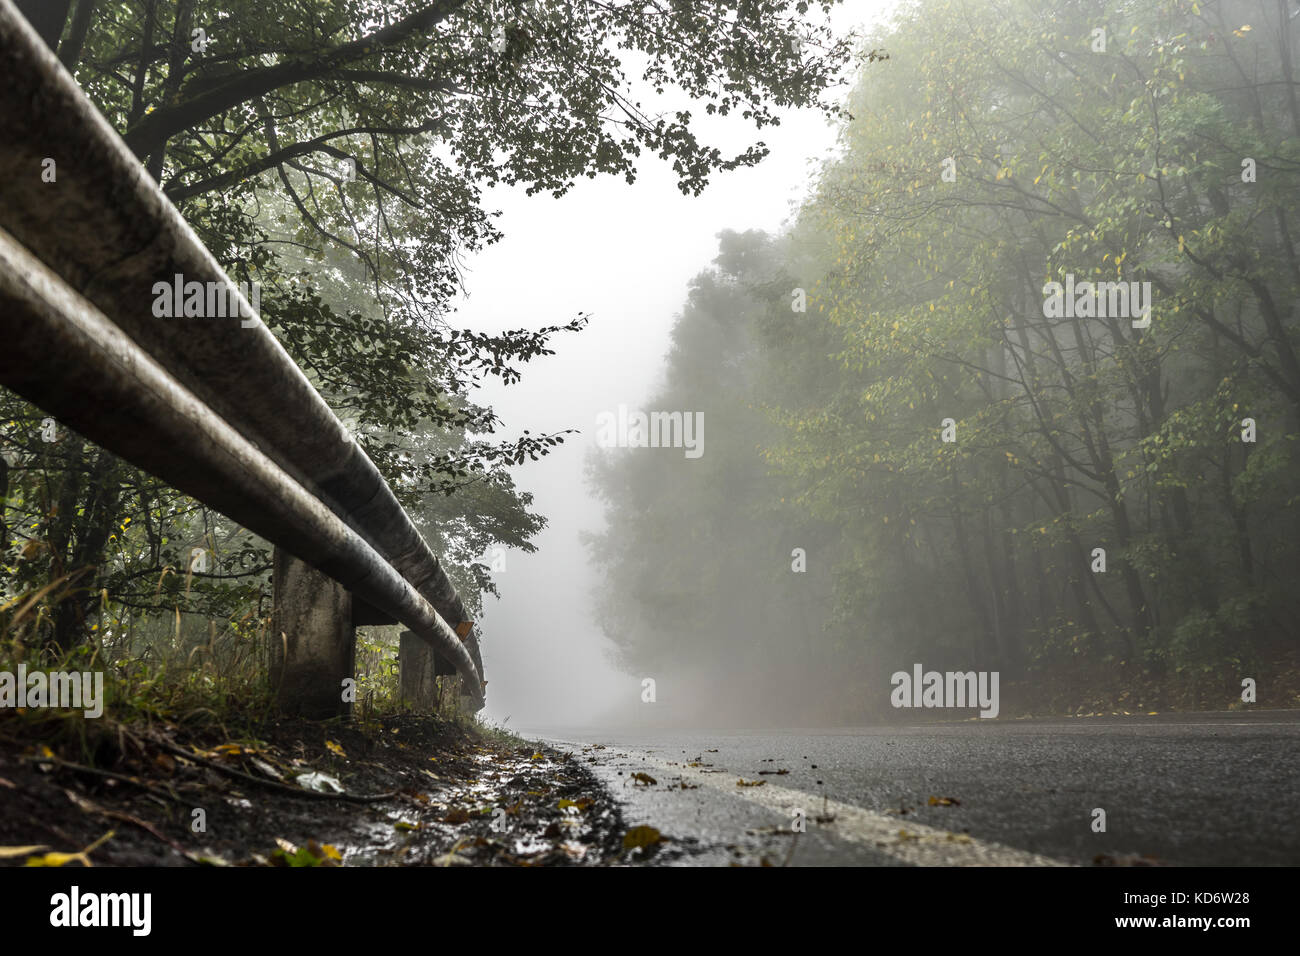 Wet road in the forest, fence and roadside horizontal Stock Photo